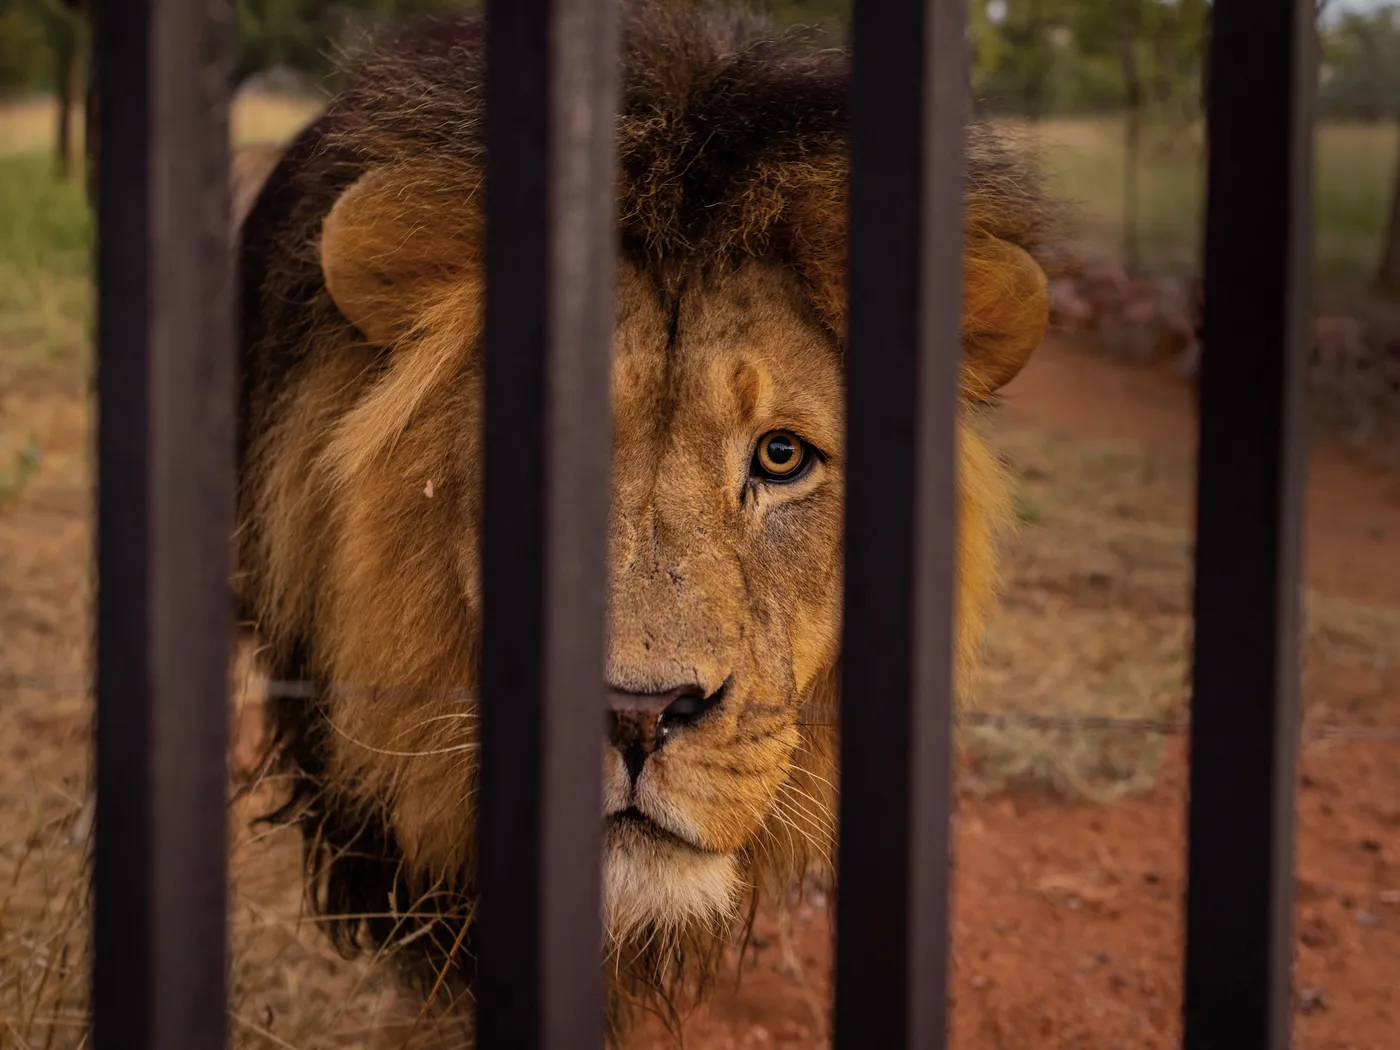 Opener - A captive-bred male lion at Warthog Safaris in Limpopo, South Africa.